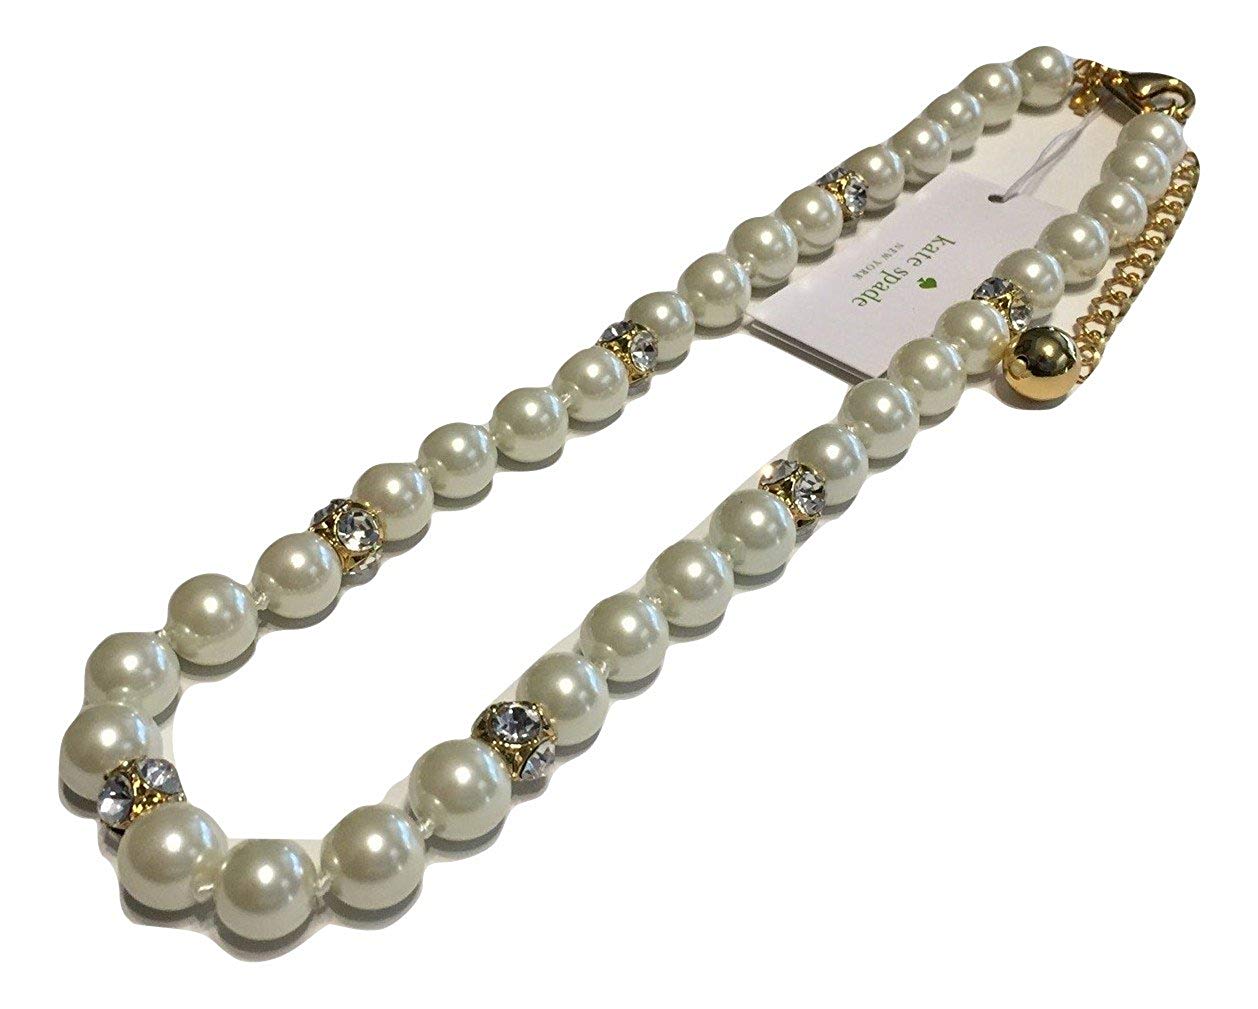 Kate Spade New York Love Lady Marmalade Pearl Necklace